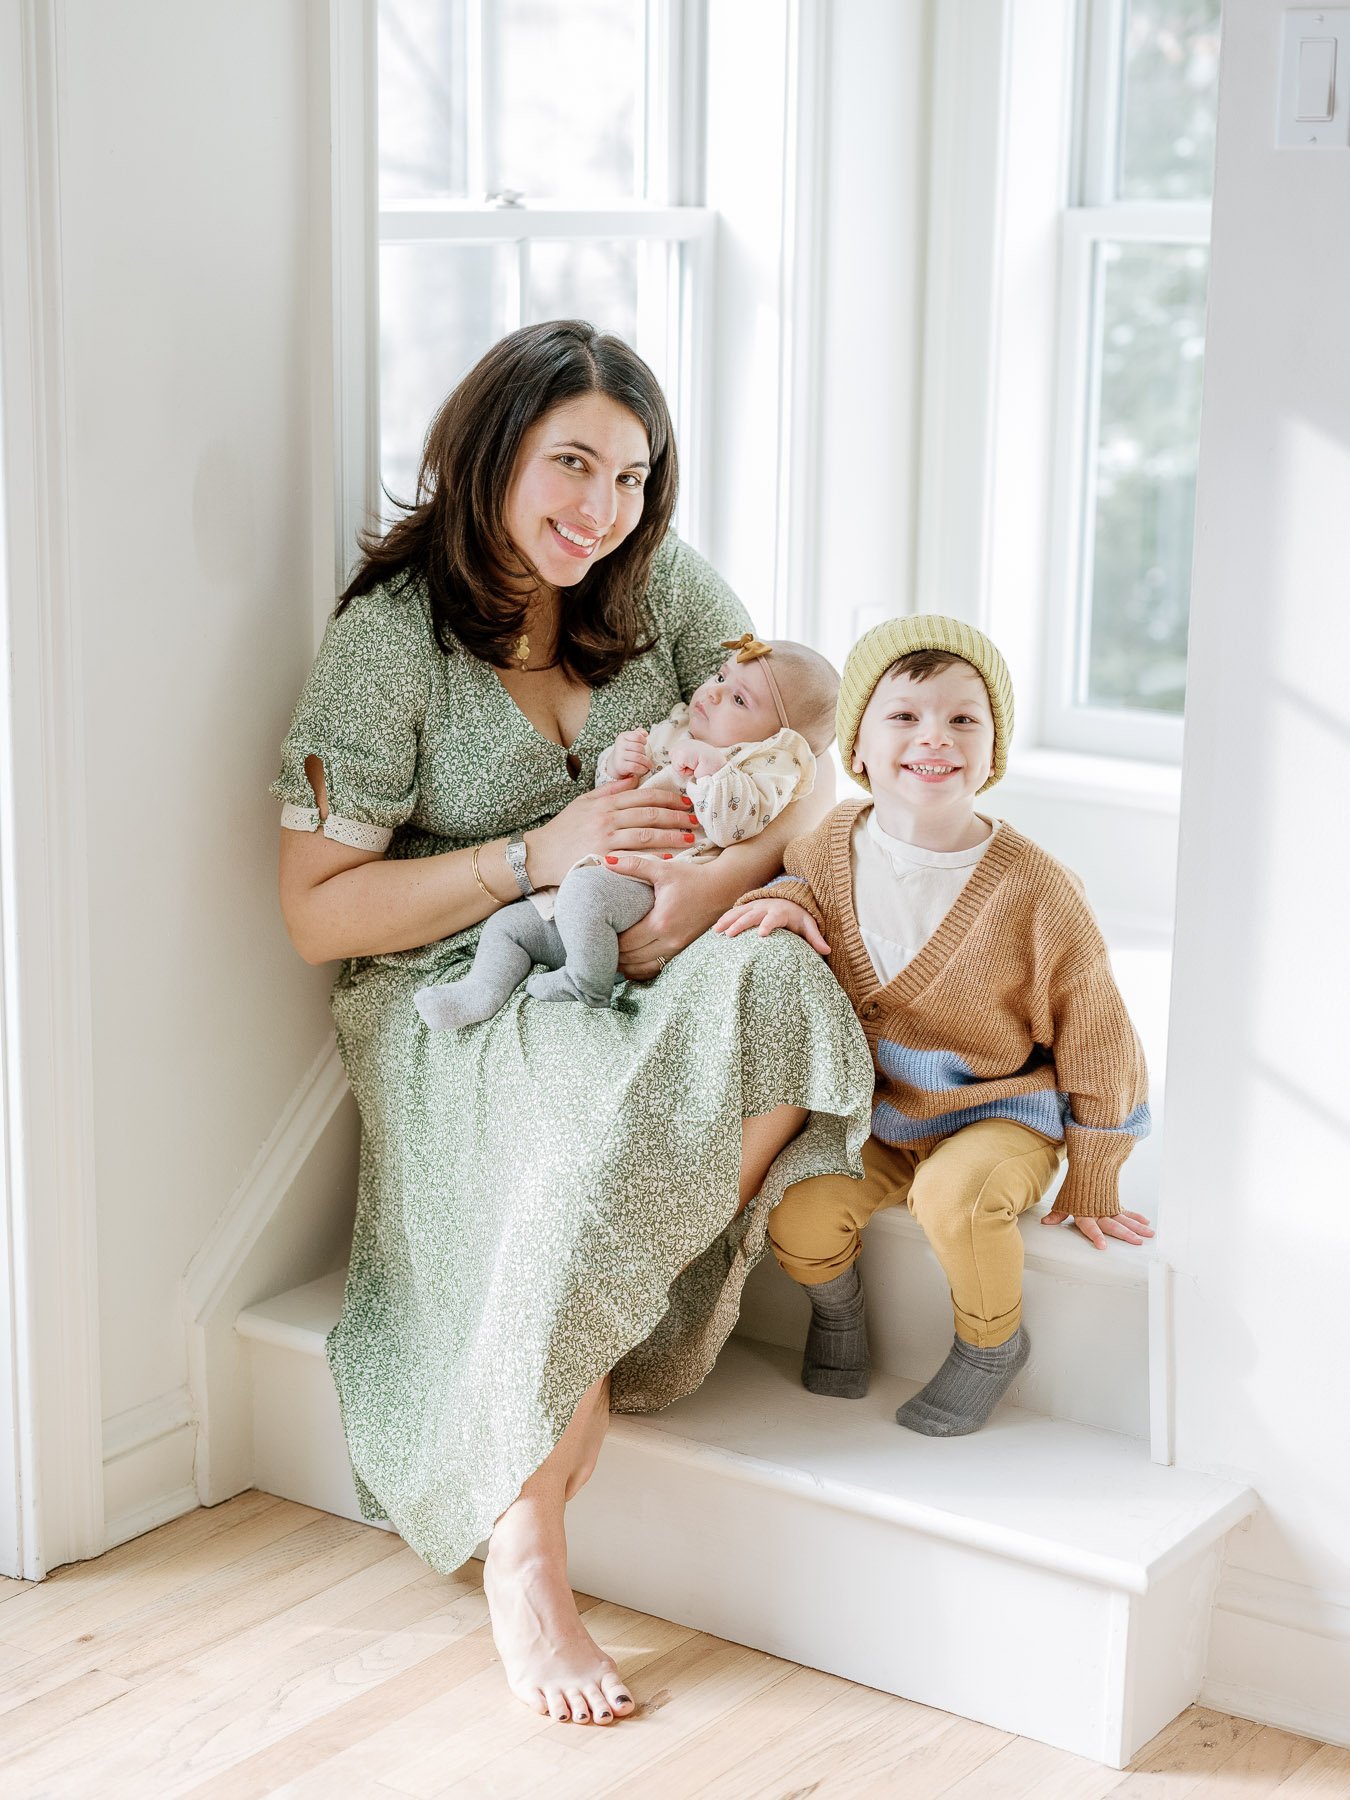 Saratoga Springs Newborn and Family Portraits by Michelle Lange Photography-10.jpg